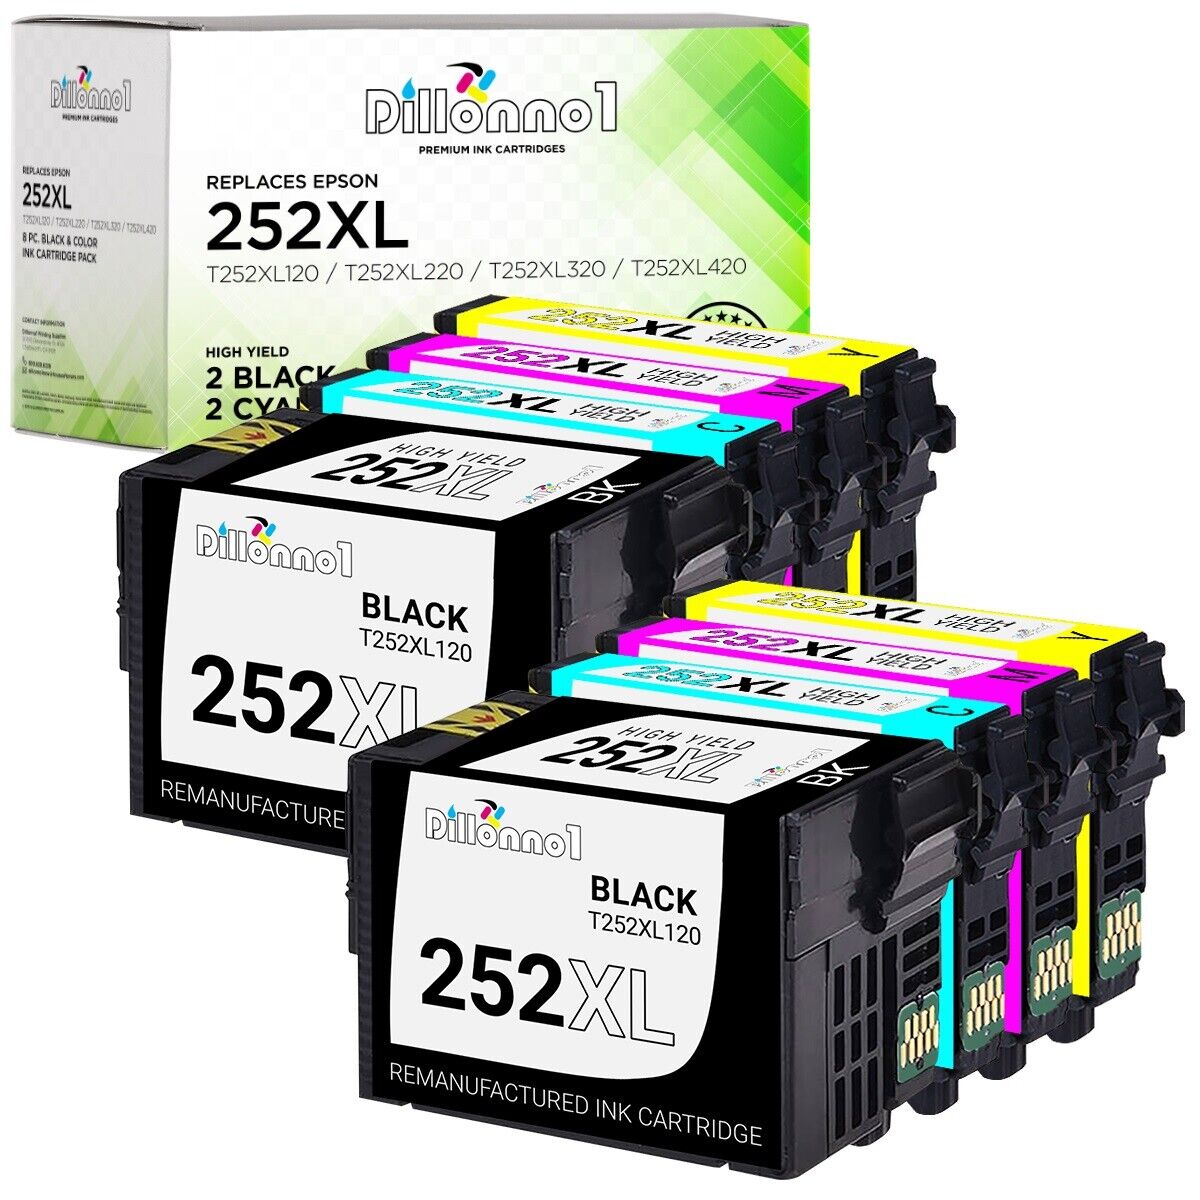 Replacement for 252XL Epson T252XL T252 Ink WorkForce WF-3620 WF-3640 WF-7110